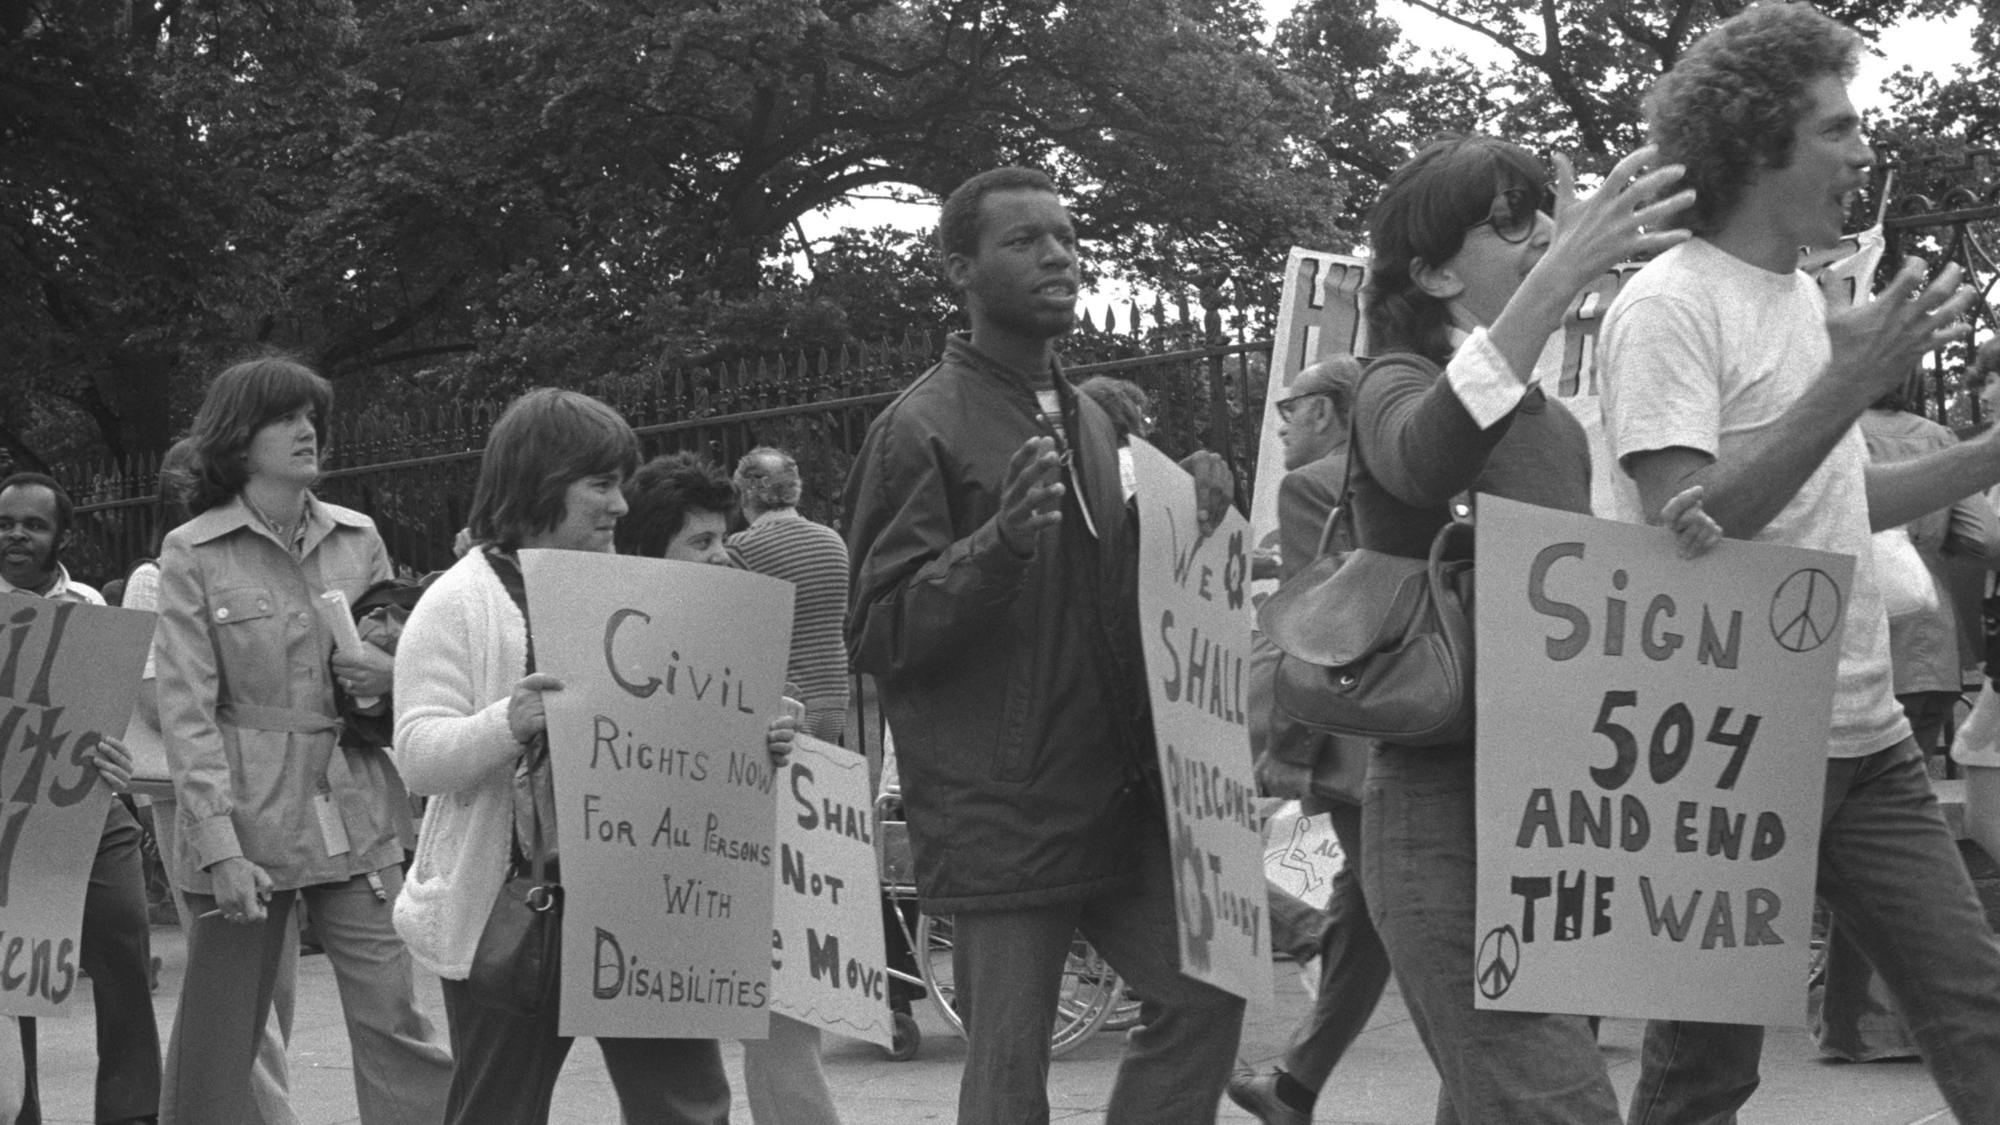 Demonstrators are pictured in black and white, holding signs that read “Civil Rights Now for All Persons with Disabilities” and “Sign 504 and End the War.”